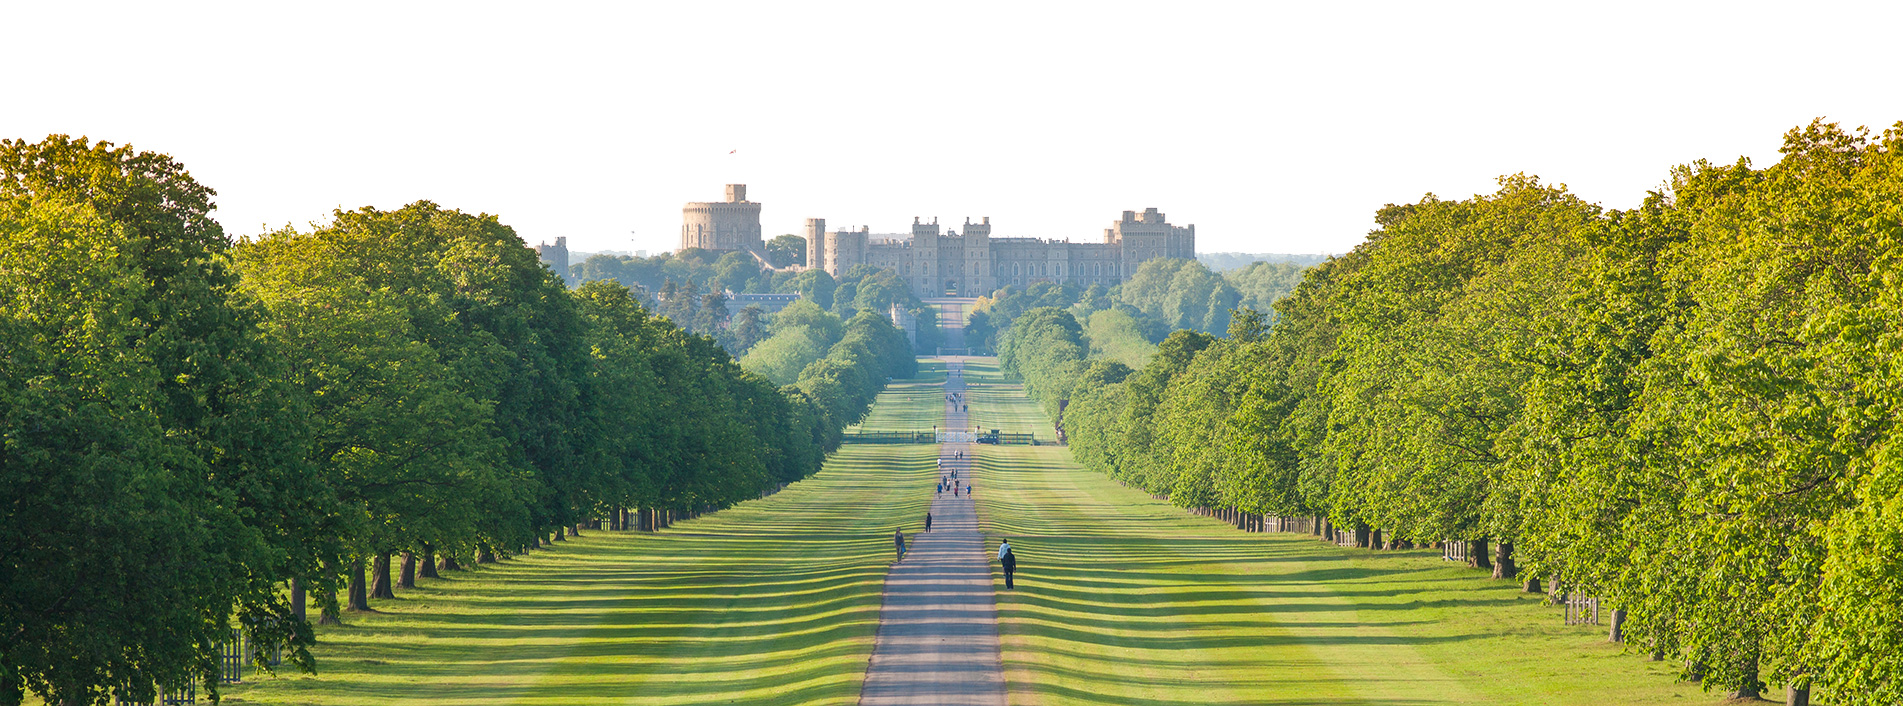 The Long Walk with Windsor Castle in the background.